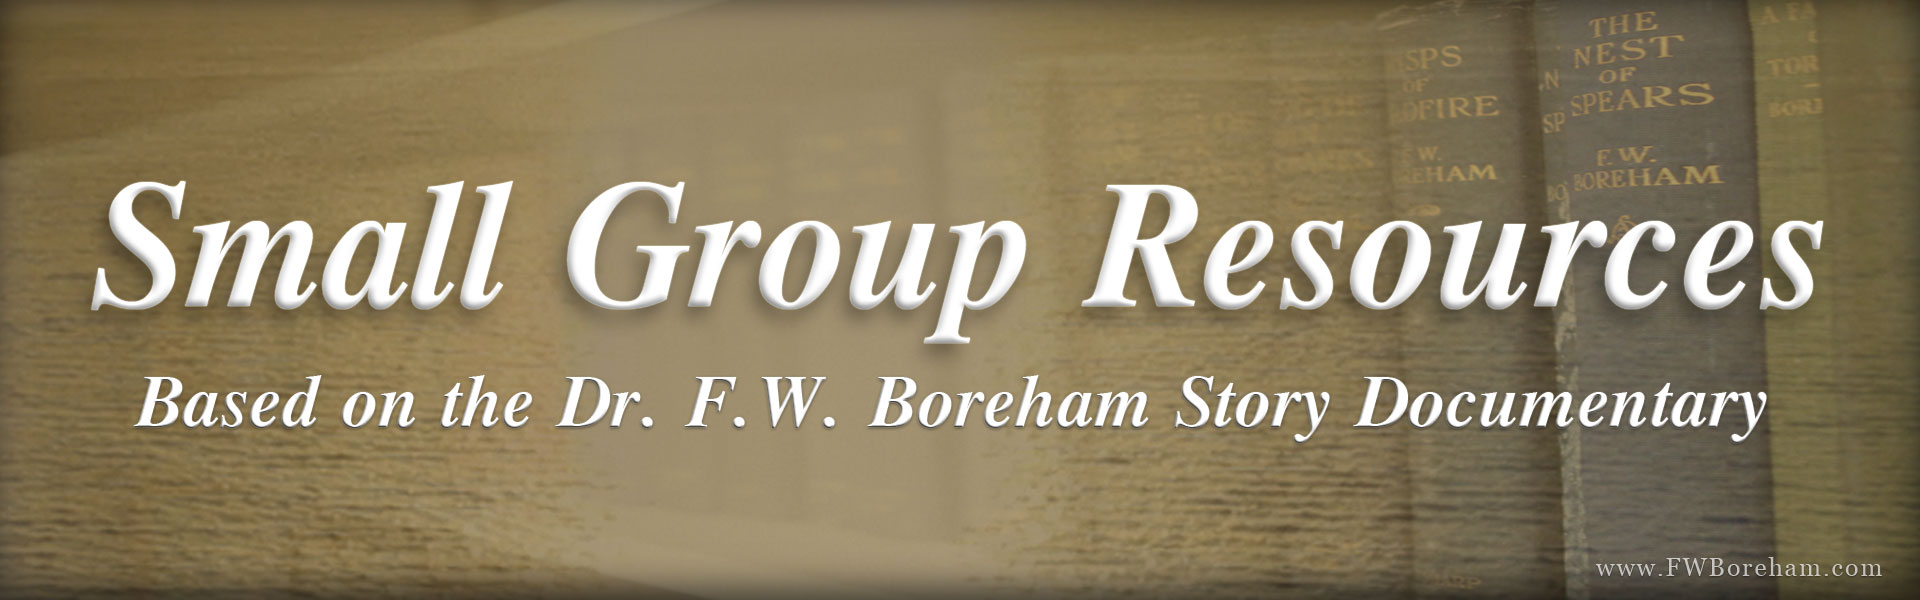 FWB Small Group Resources